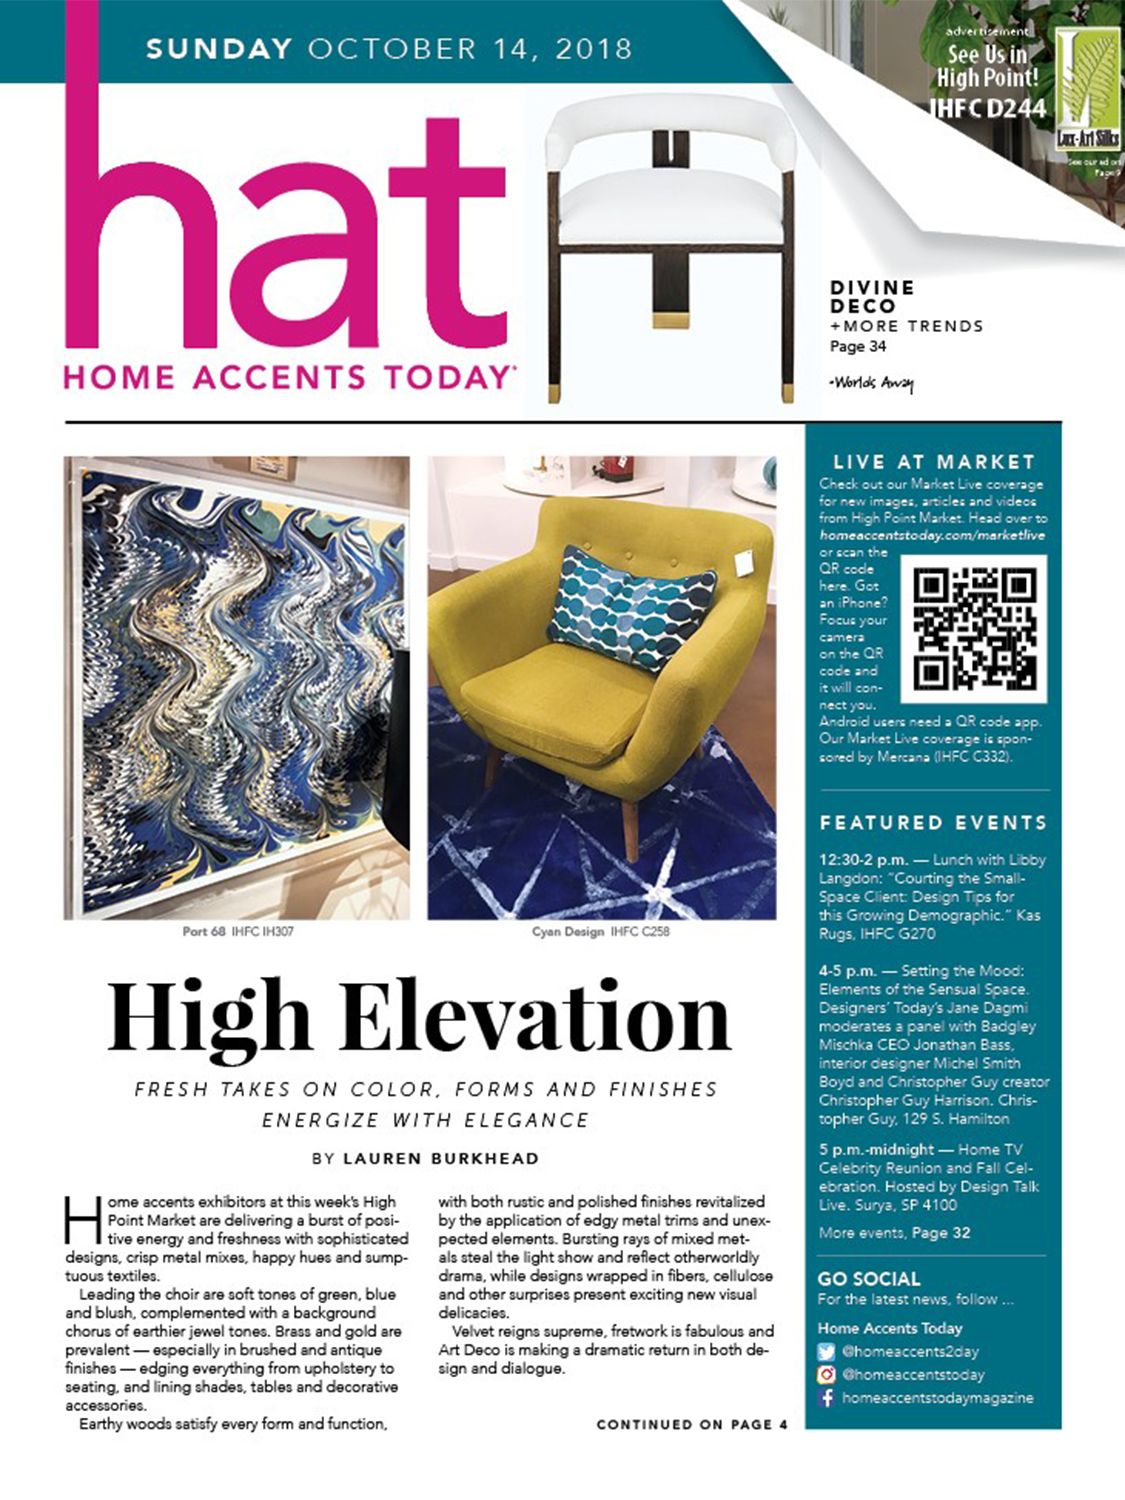 Home Accents Today - Sunday 10, 2018